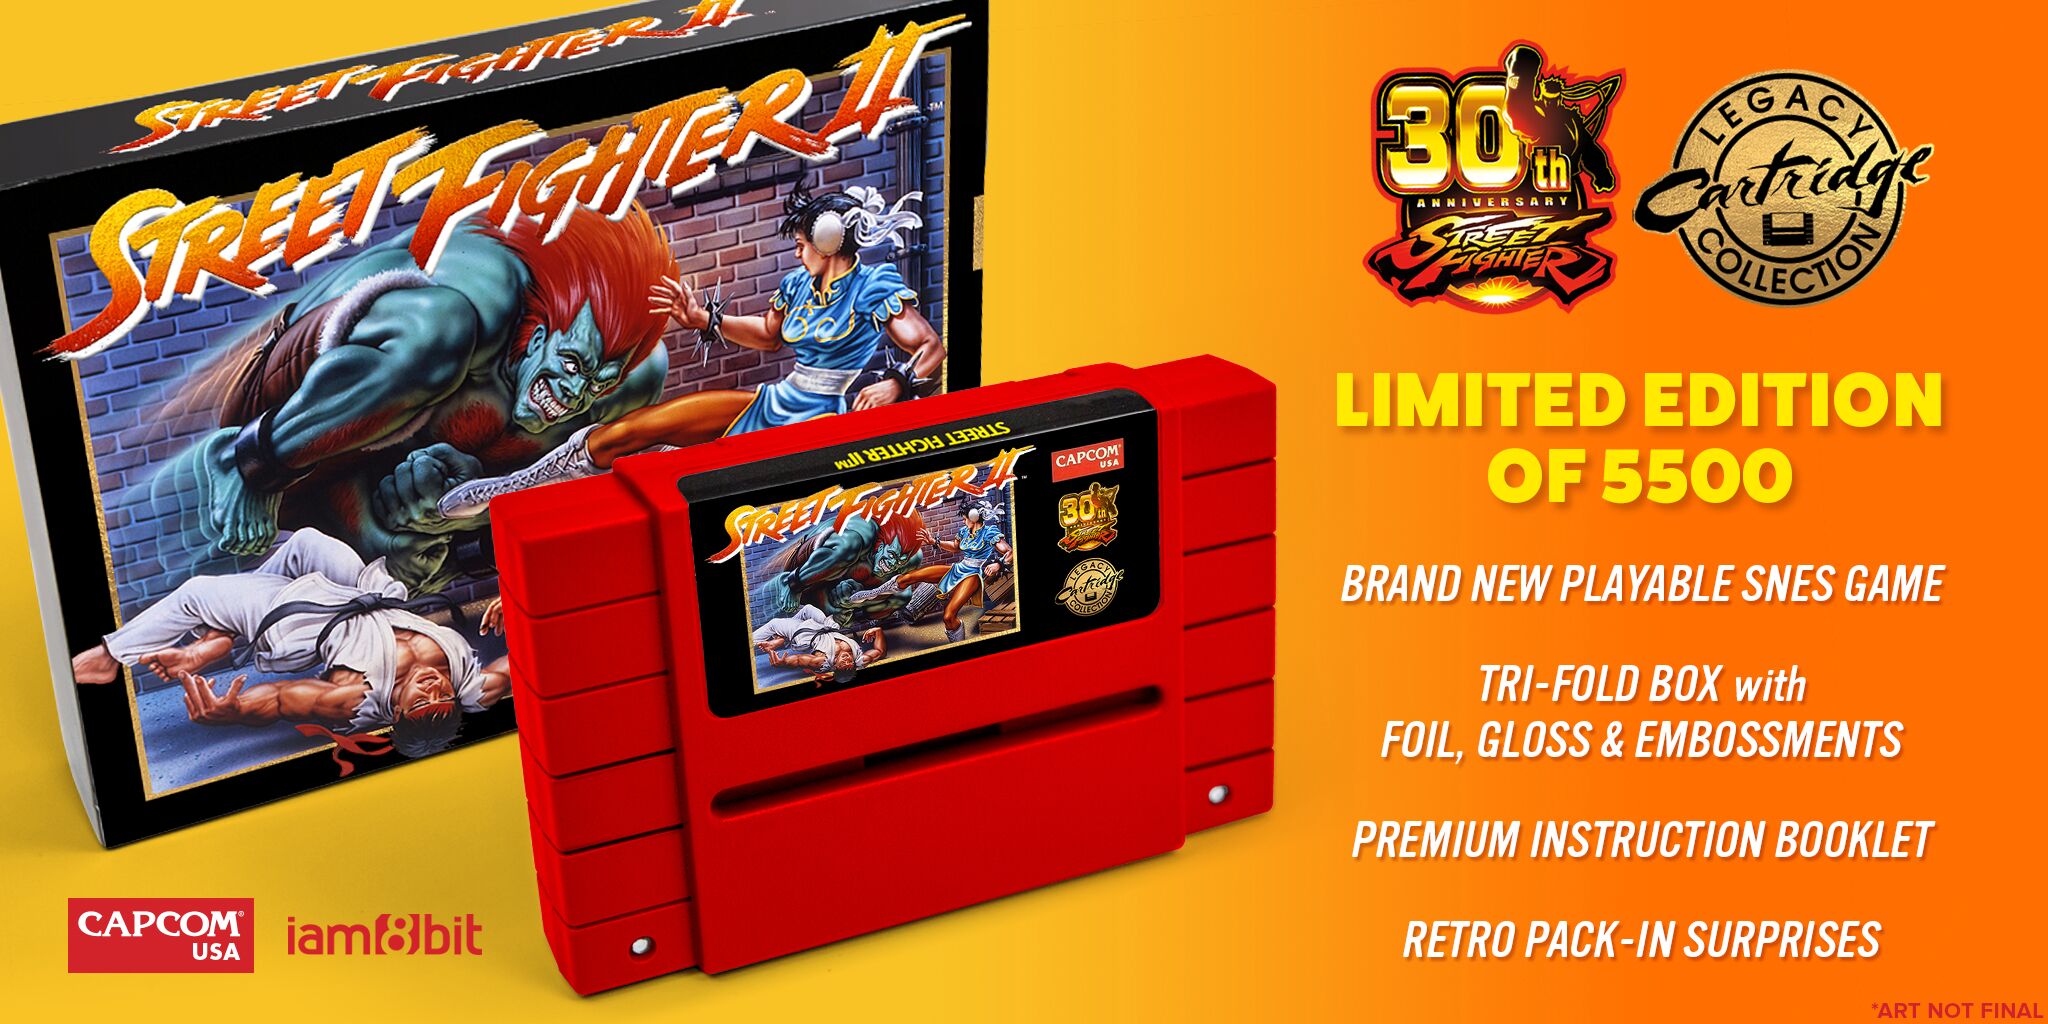 Celebrate Street Fighter's 30th anniversary with this limited 